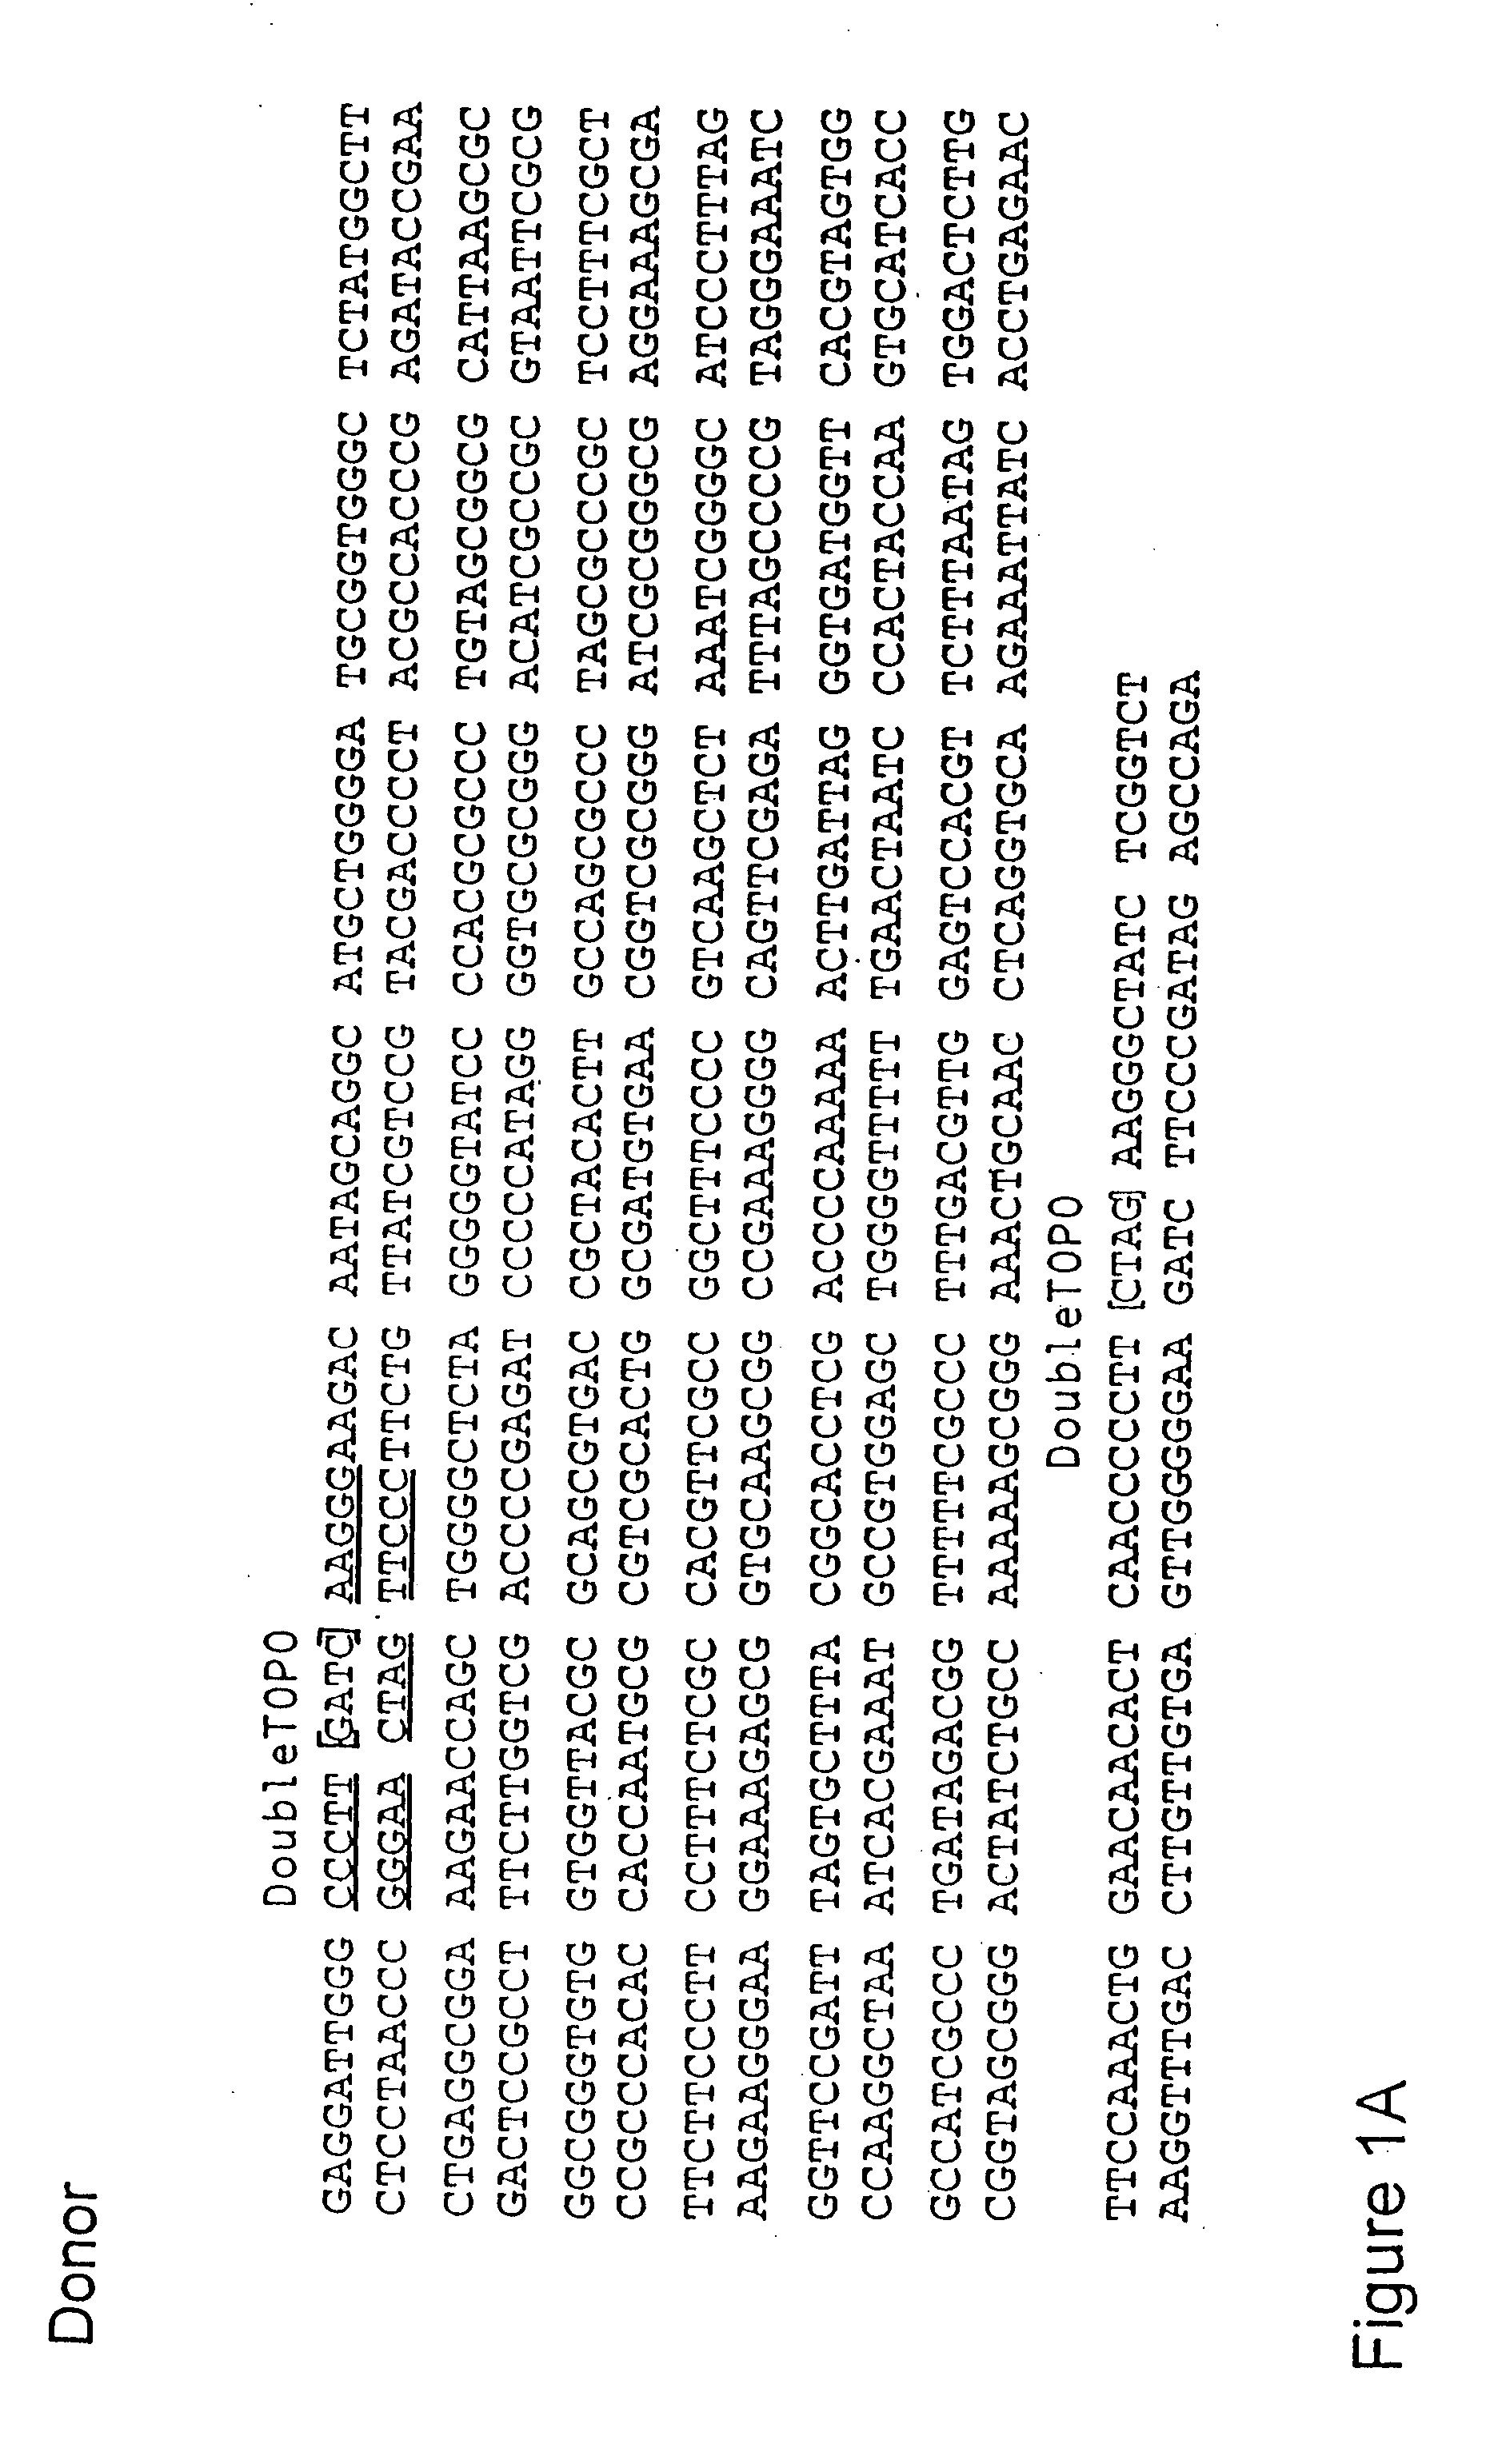 System for the rapid manipulation of nucleic acid sequenaces